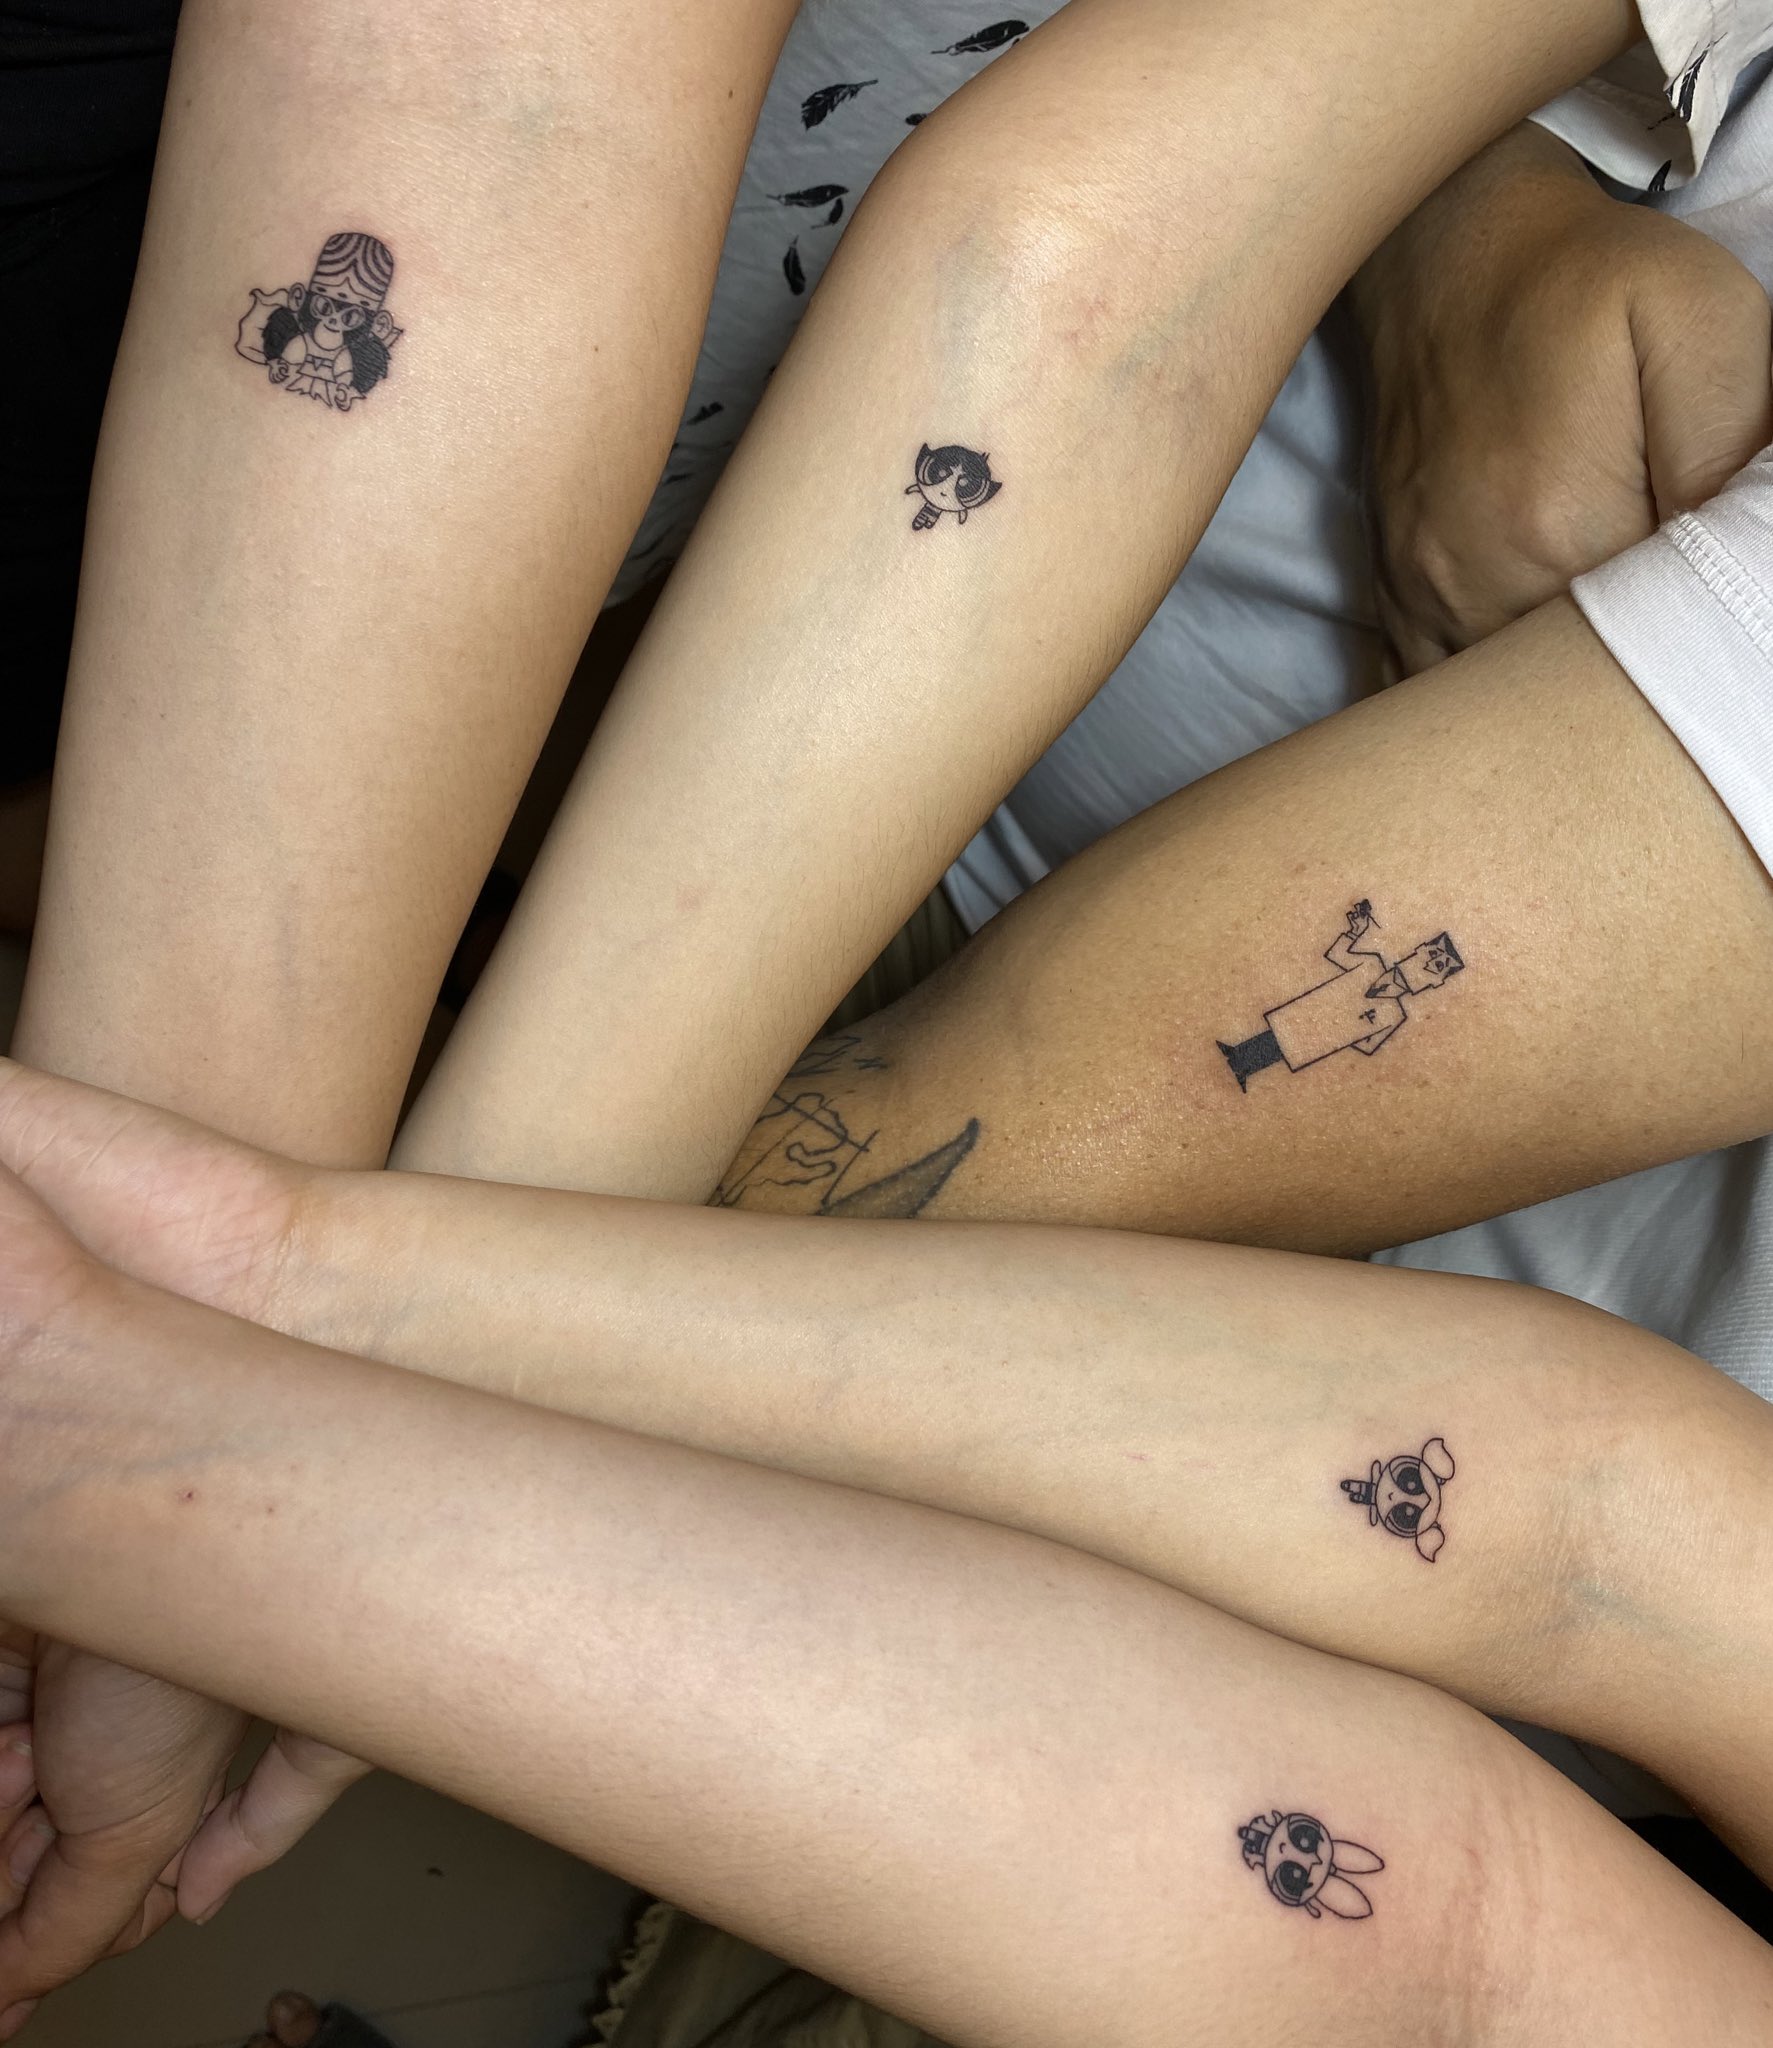 The Powerpuff Girls Flying Trio SemiPermanent Tattoo Lasts 12 weeks  Painless and easy to apply Organic ink Browse more or create your own   Inkbox  SemiPermanent Tattoos